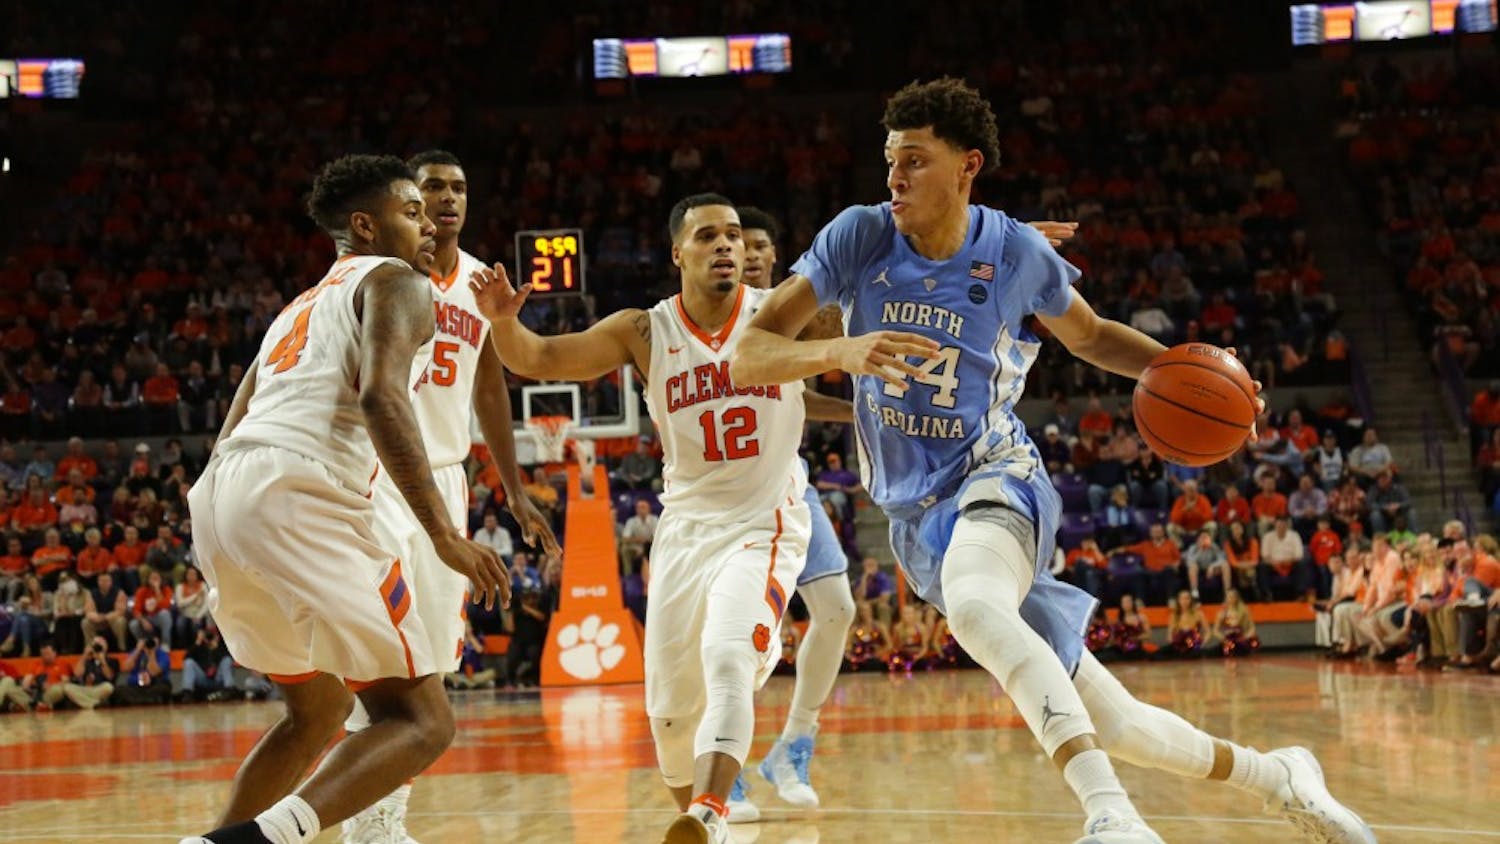 UNC-CH forward Justin Jackson (44) drives to the basket against Clemson on Tuesday night.